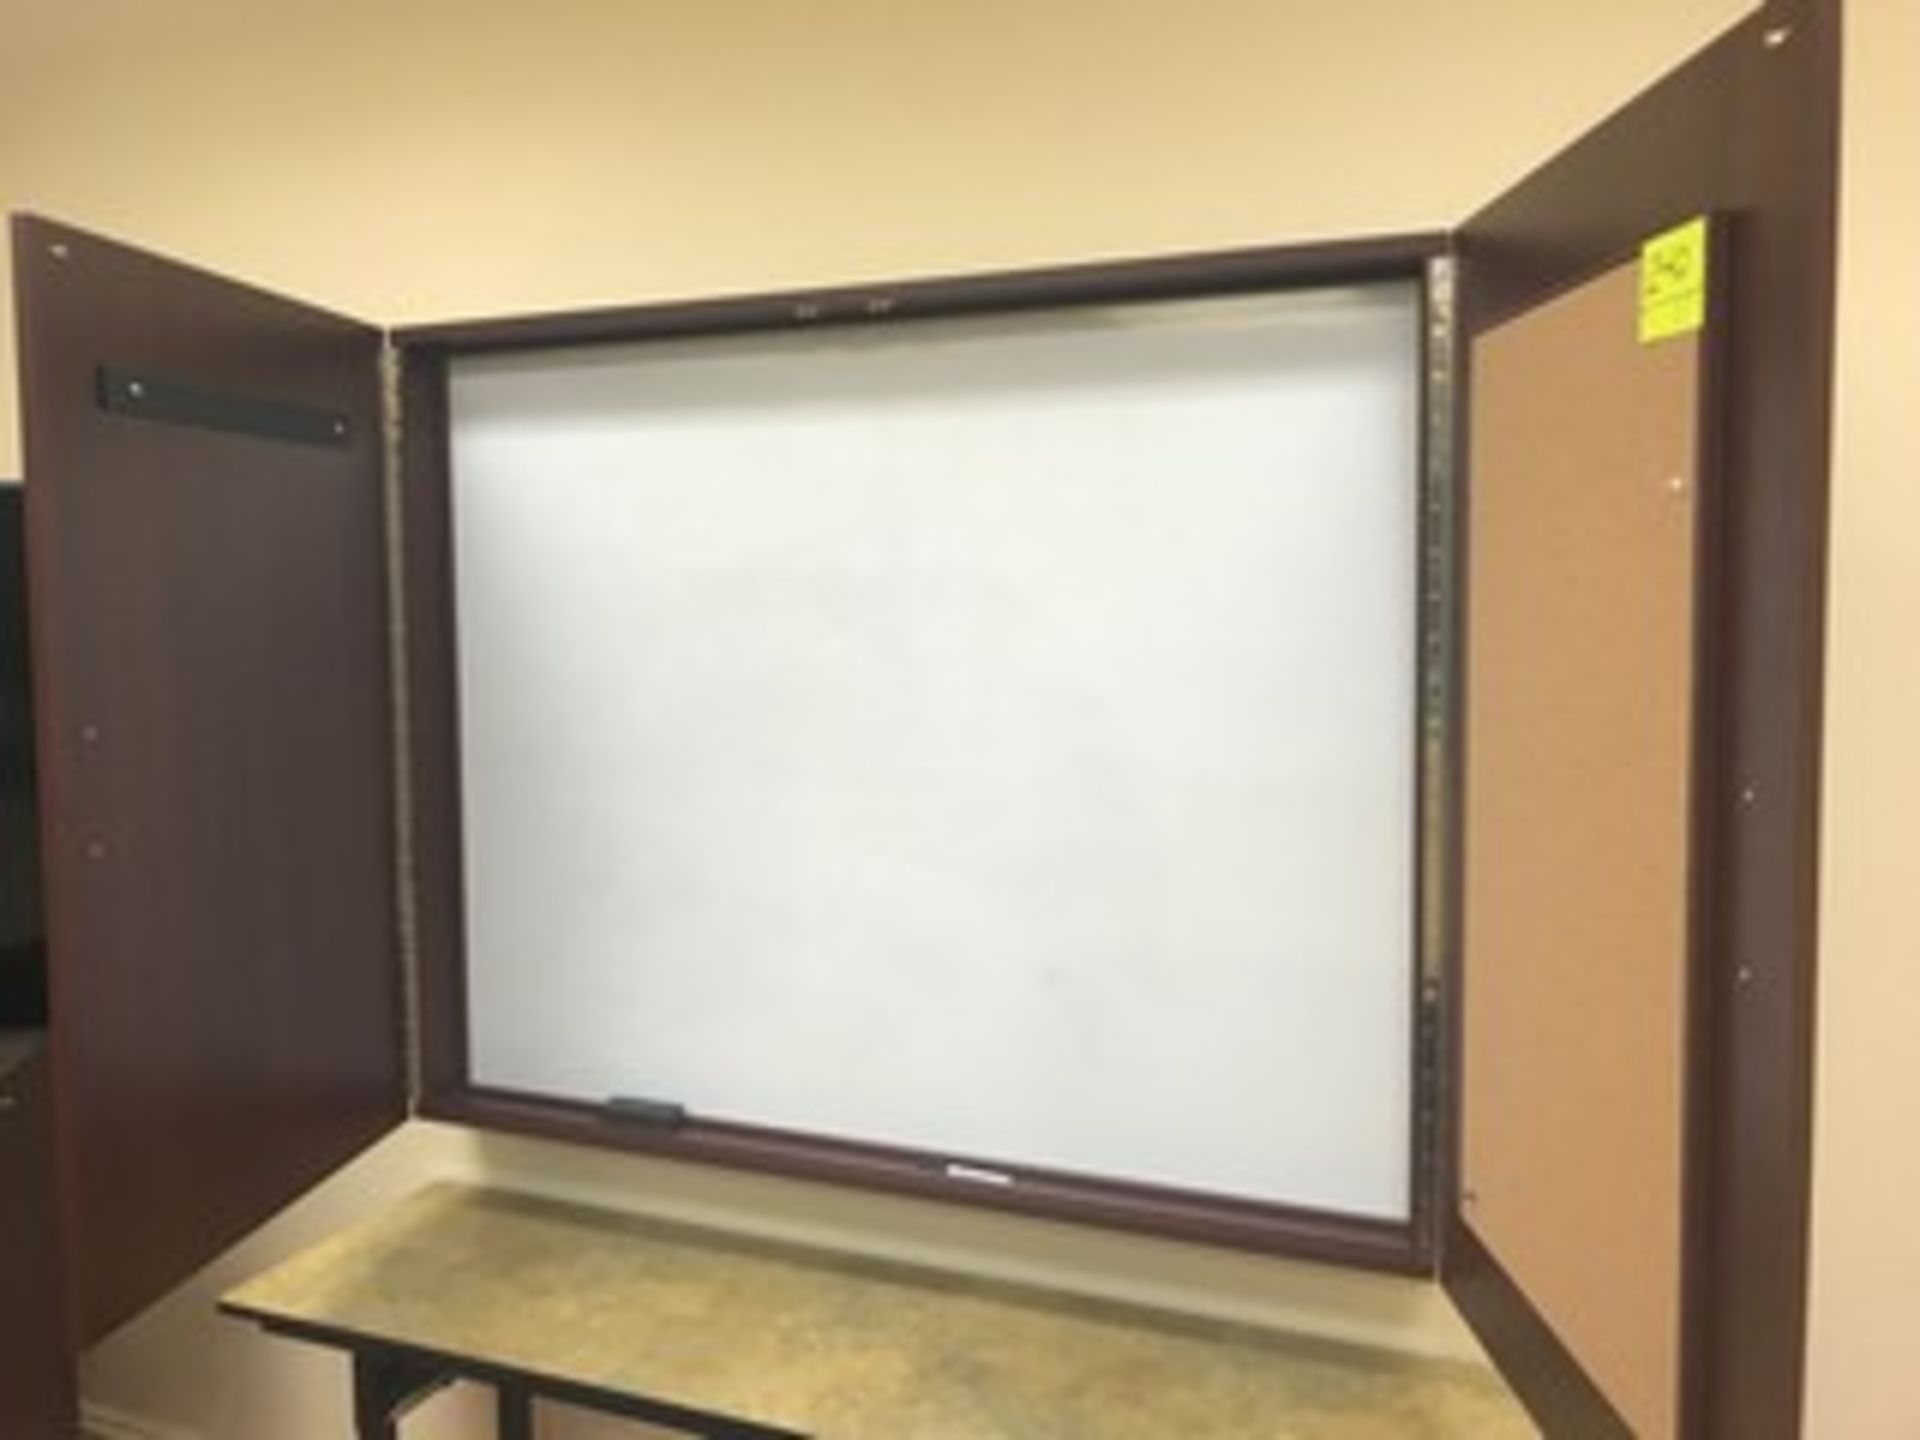 CONFERENCE ROOM CORK & WHITE BOARD - Image 2 of 2